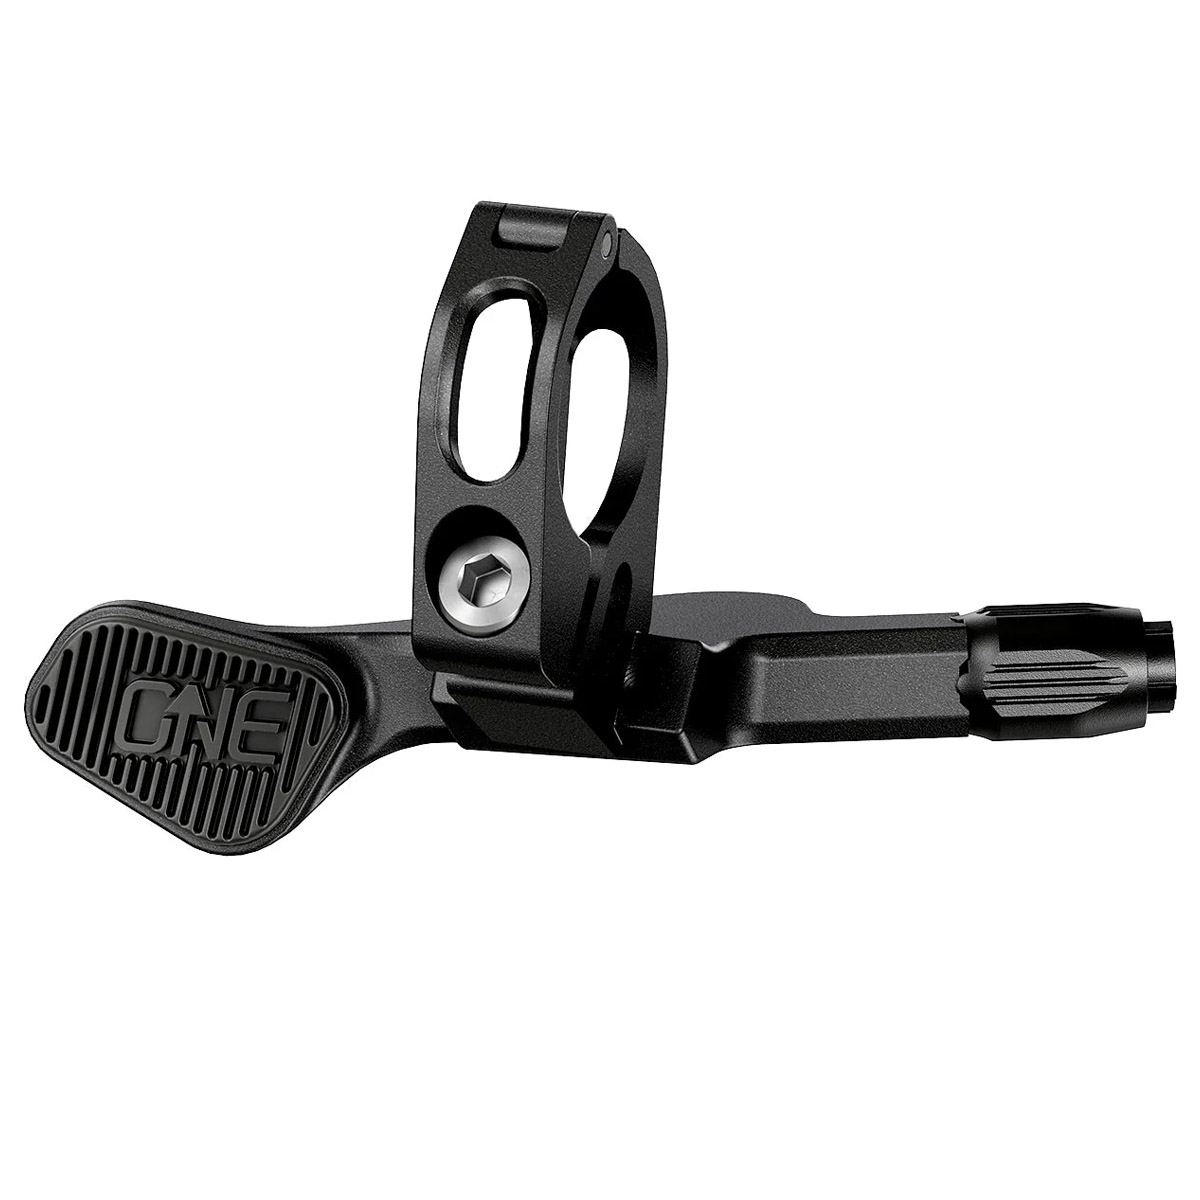 V3 Collarless Shifter for OneUp Telescopic Seatpost